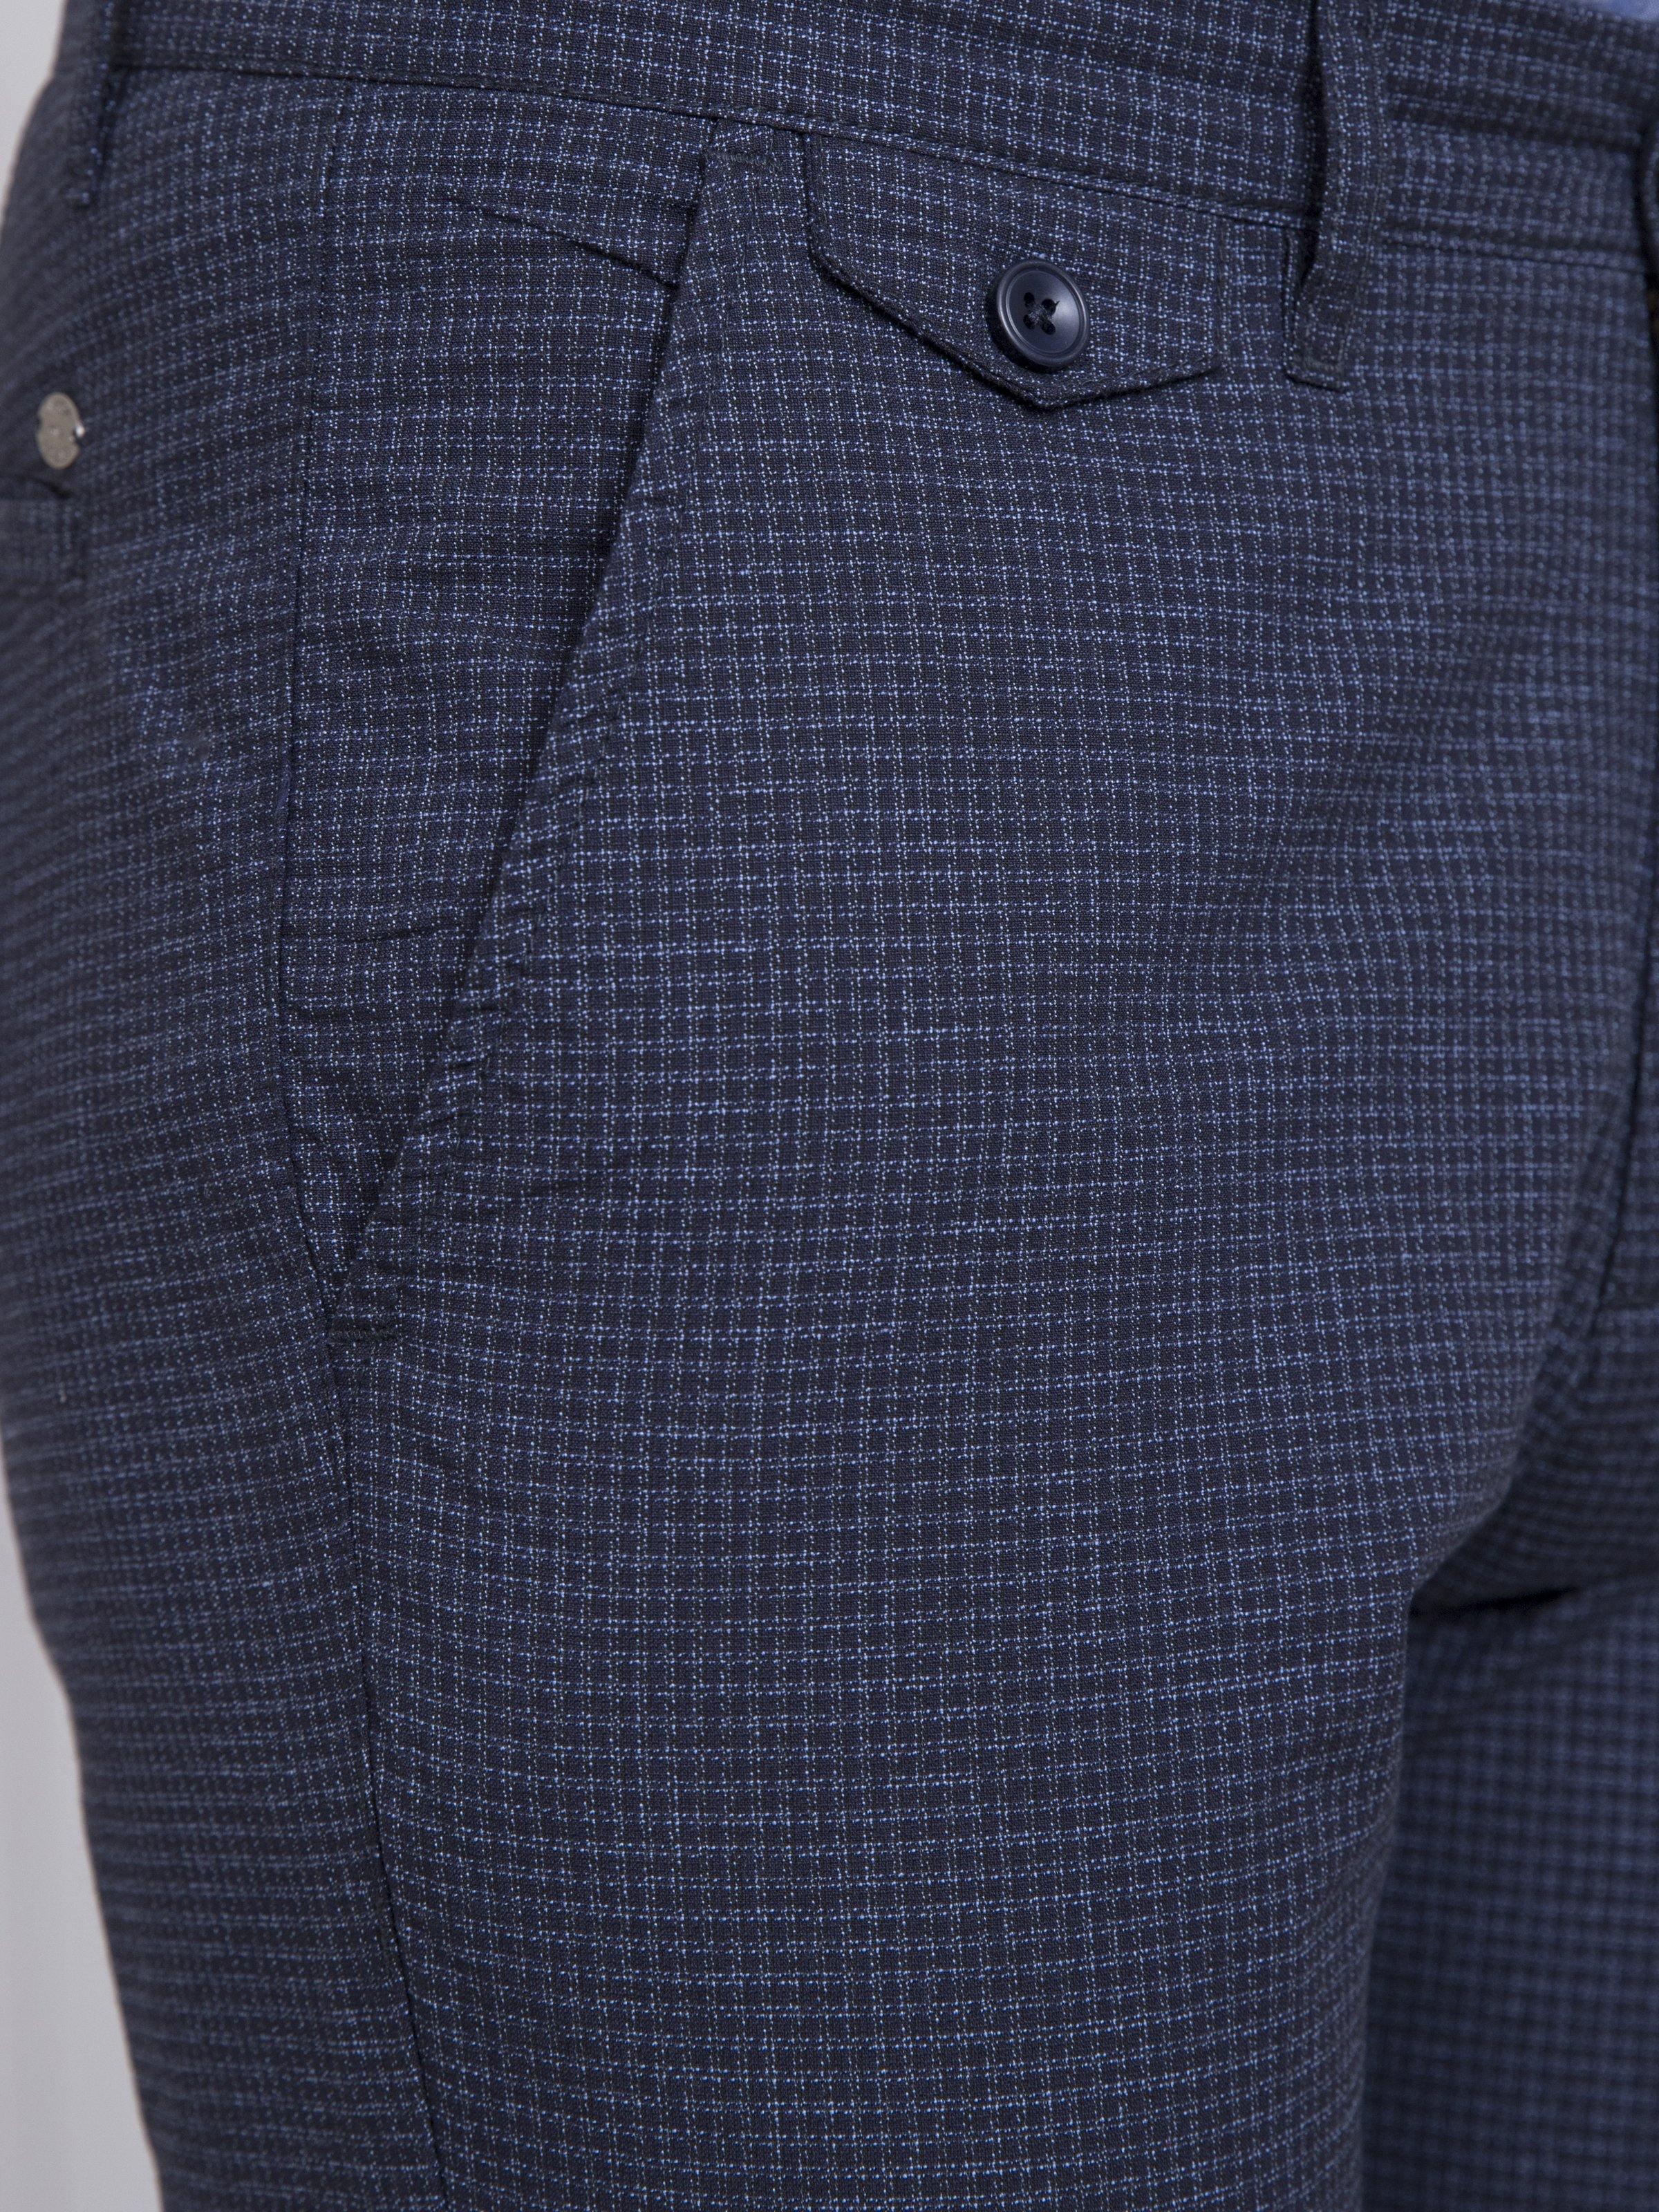 CASUAL PANT SLIM FIT NAVY BLUE CHECK at Charcoal Clothing